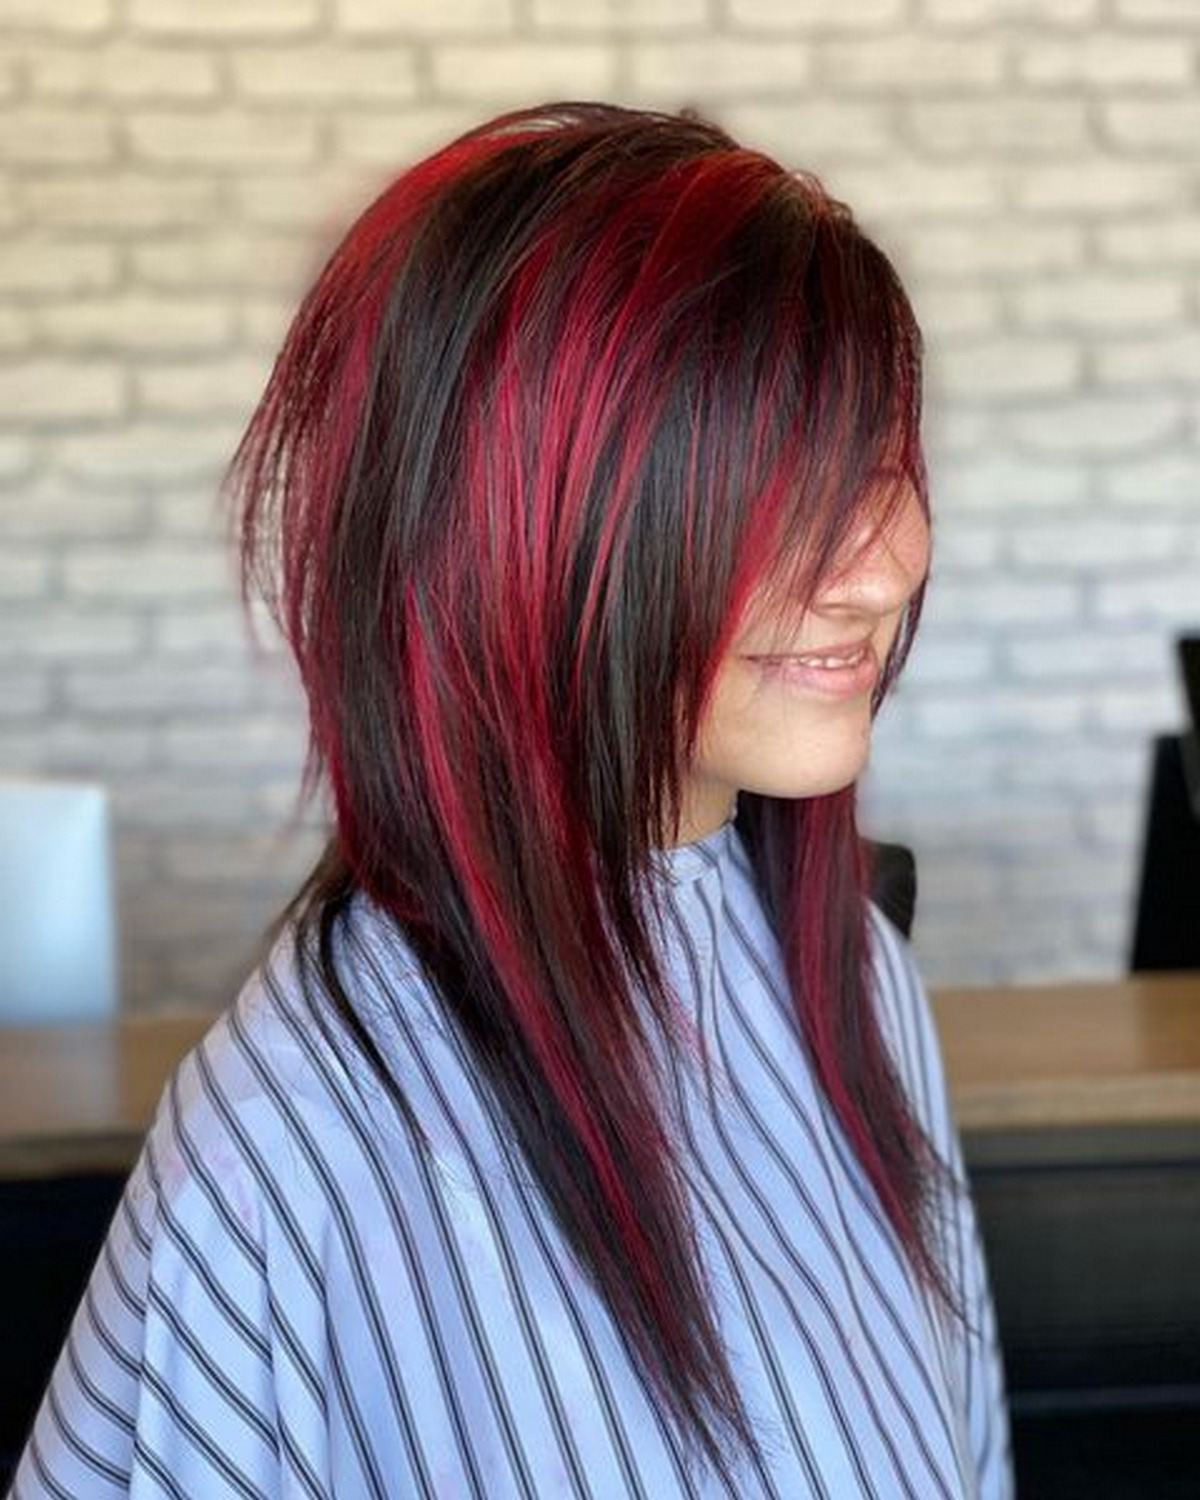 Emo Black HairStyle With Red Highlights 